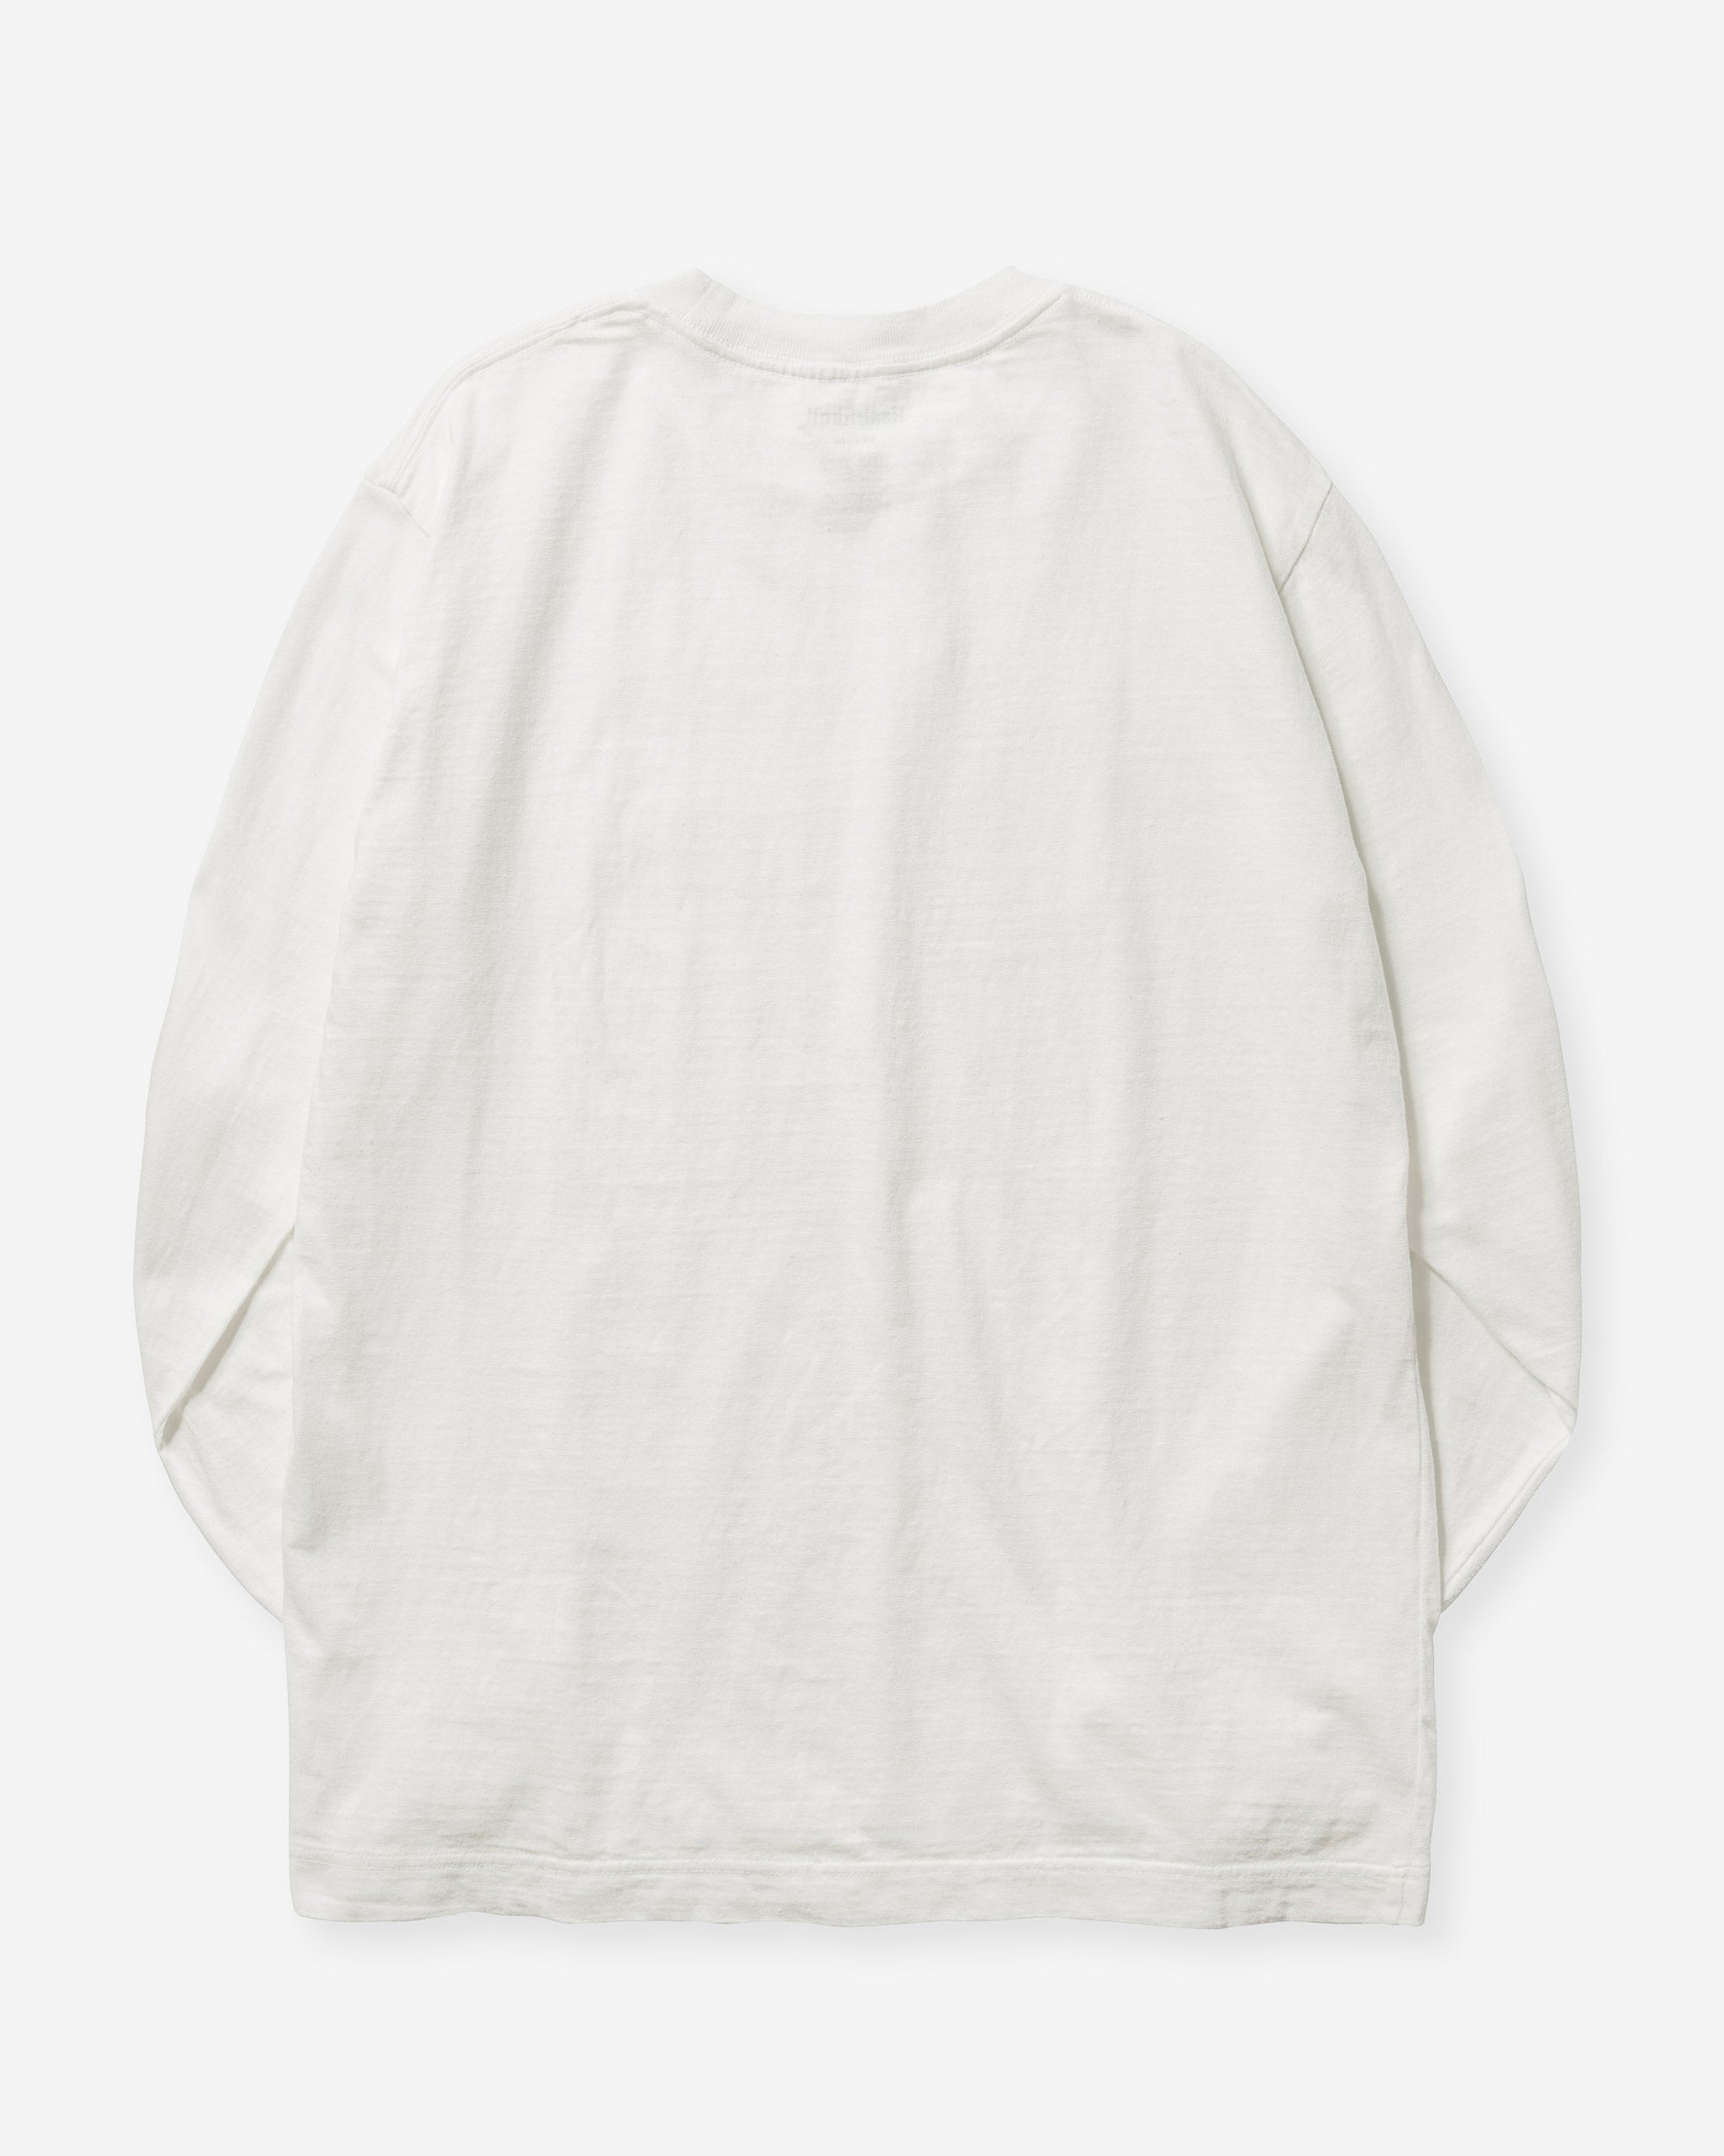 Recycled Cotton Blend Crewneck L/S - White